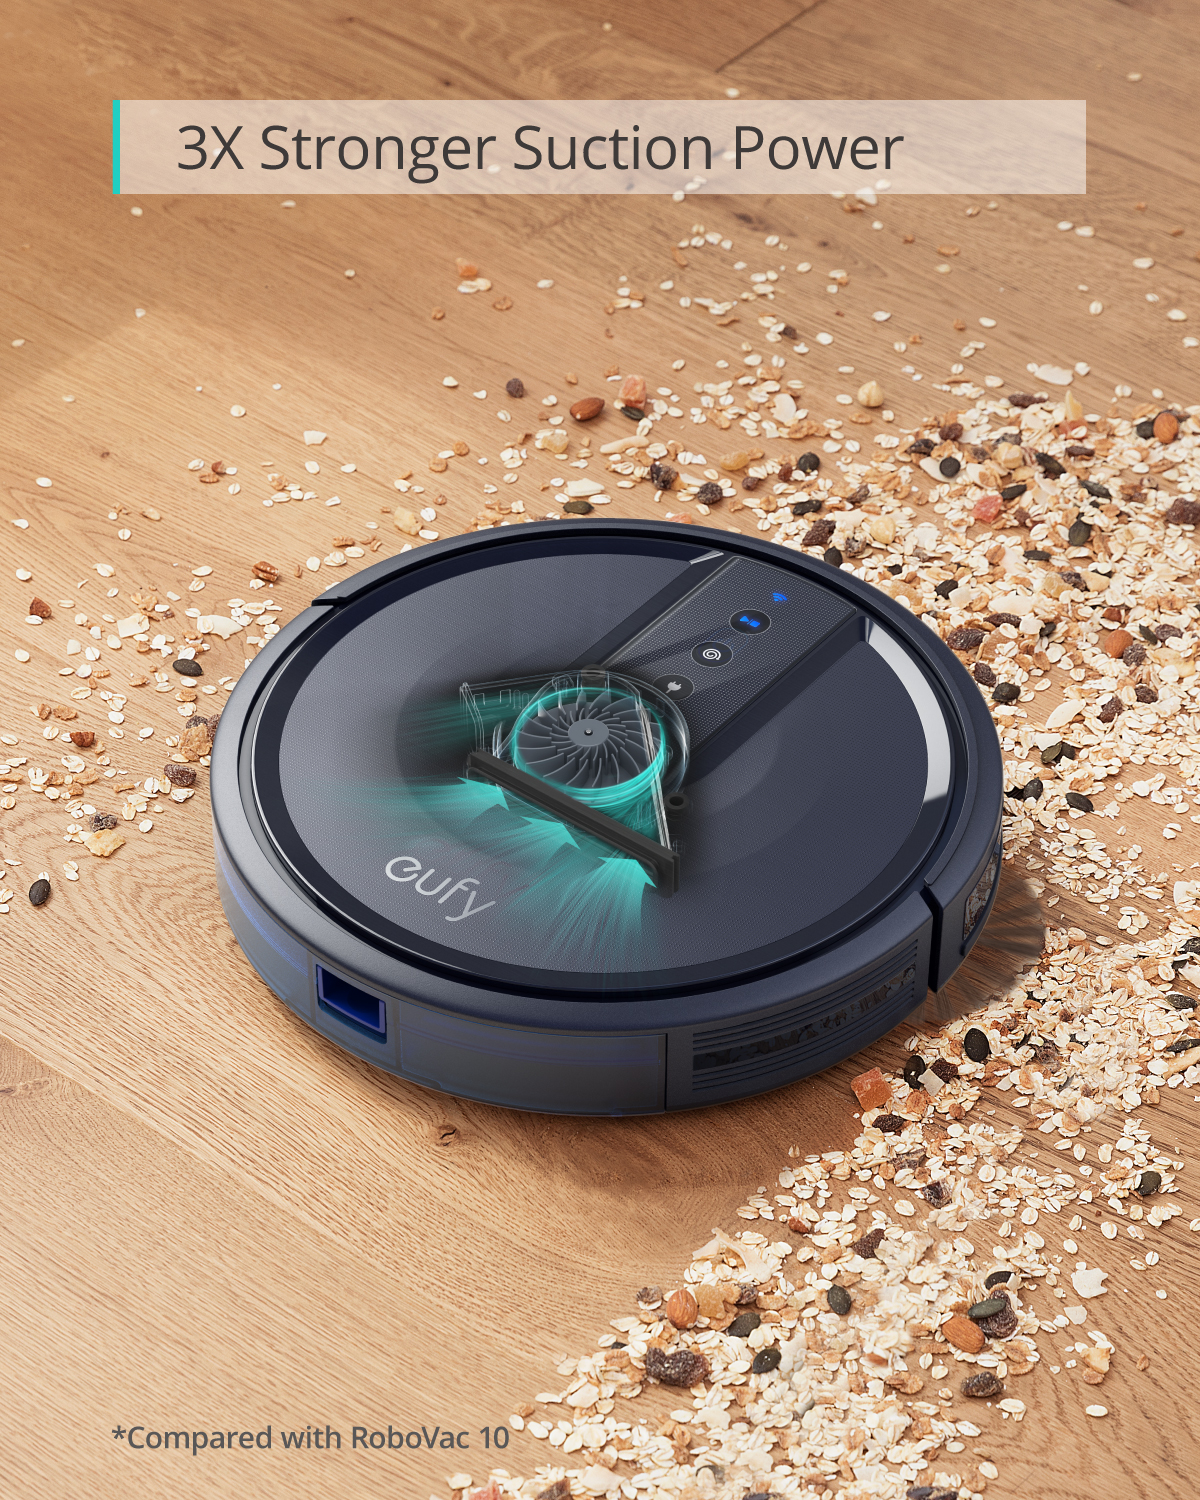 Anker eufy 25C Wi-Fi Connected Robot Vacuum, Great for Picking up Pet Hairs, Quiet, Slim - image 2 of 9